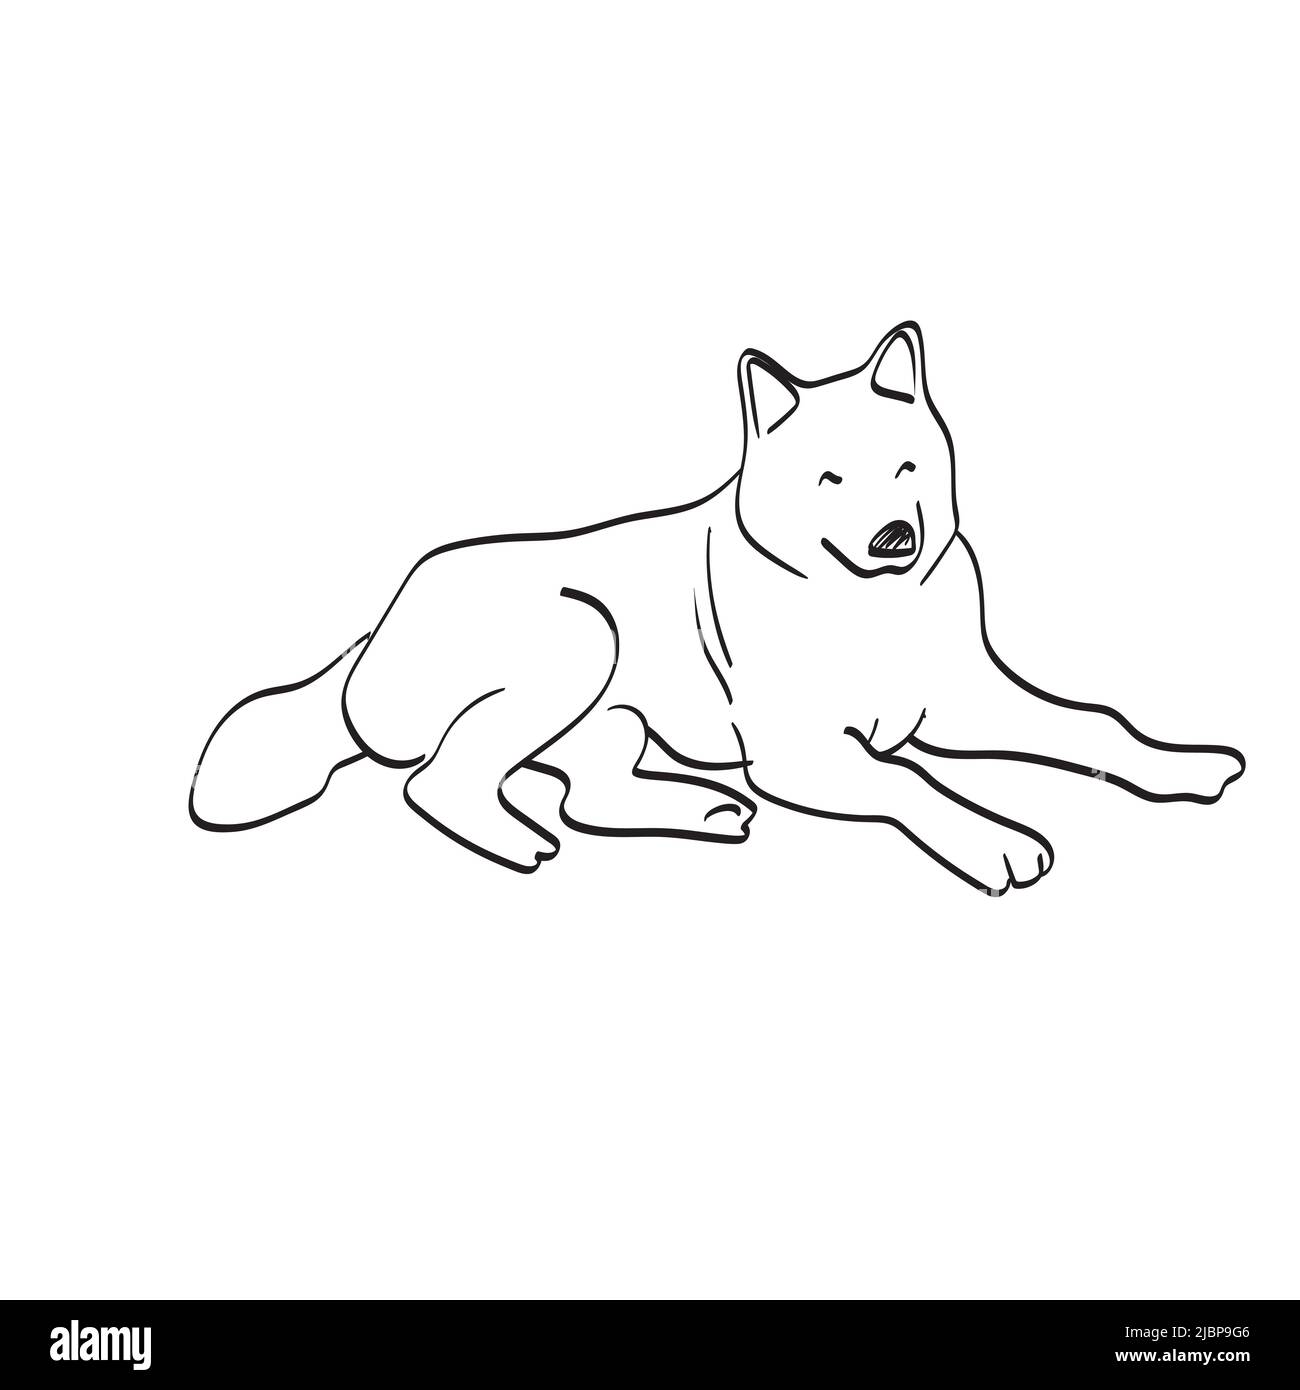 dog laying down on the ground illustration vector hand drawn isolated on white background line art. Stock Vector